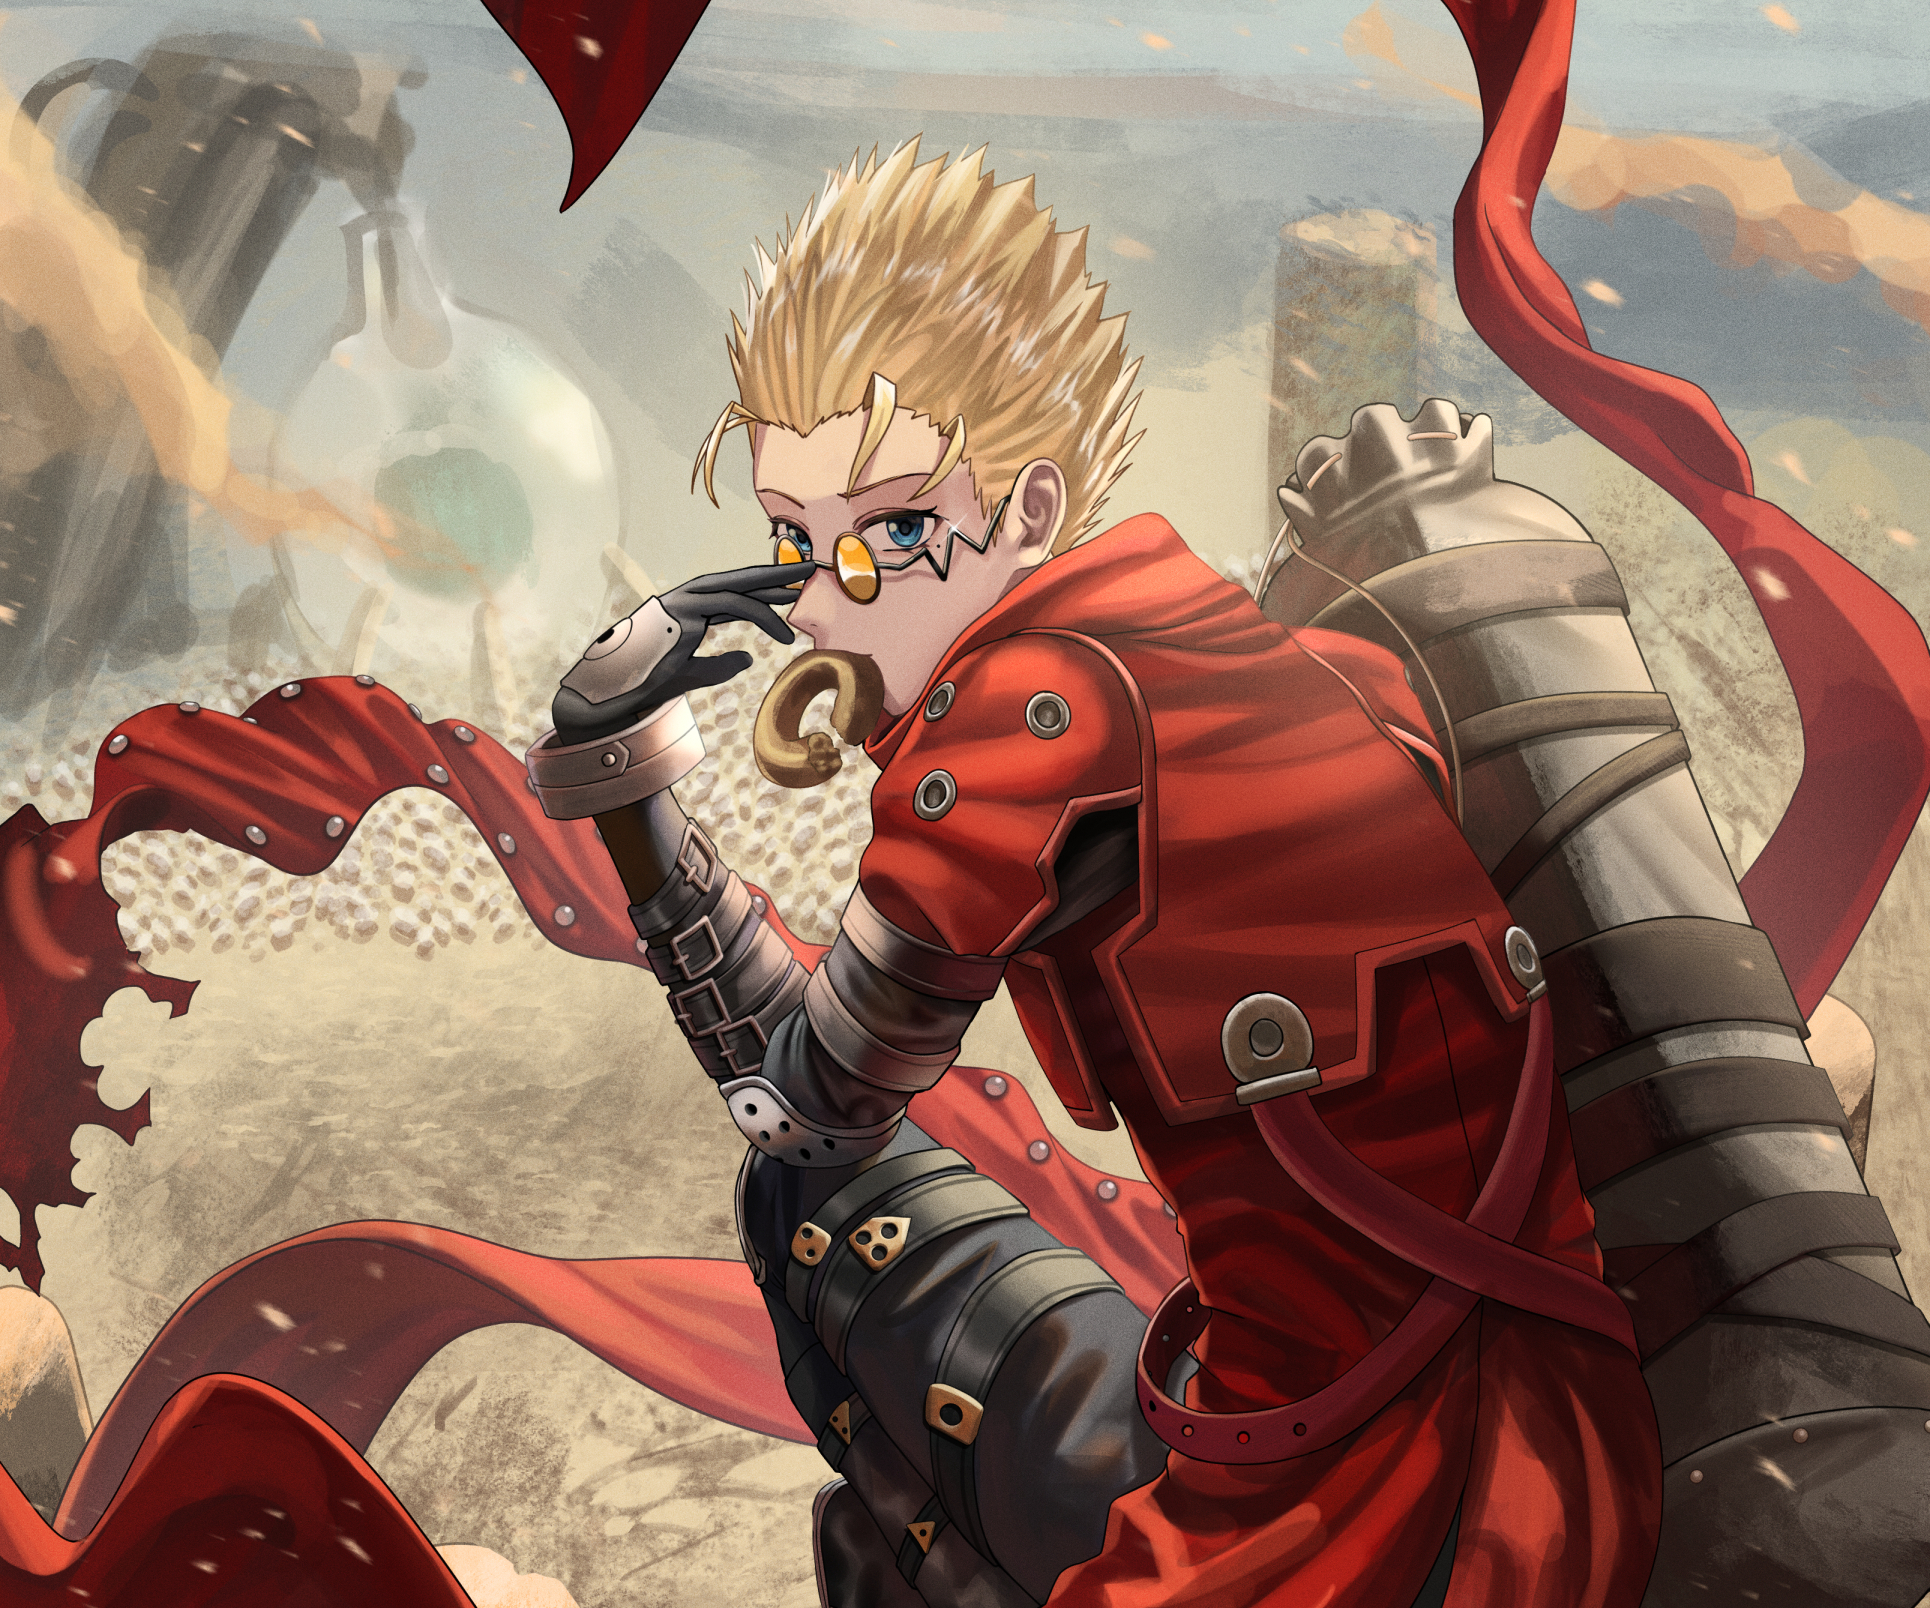 Vash the Stampede by SilverTsuki